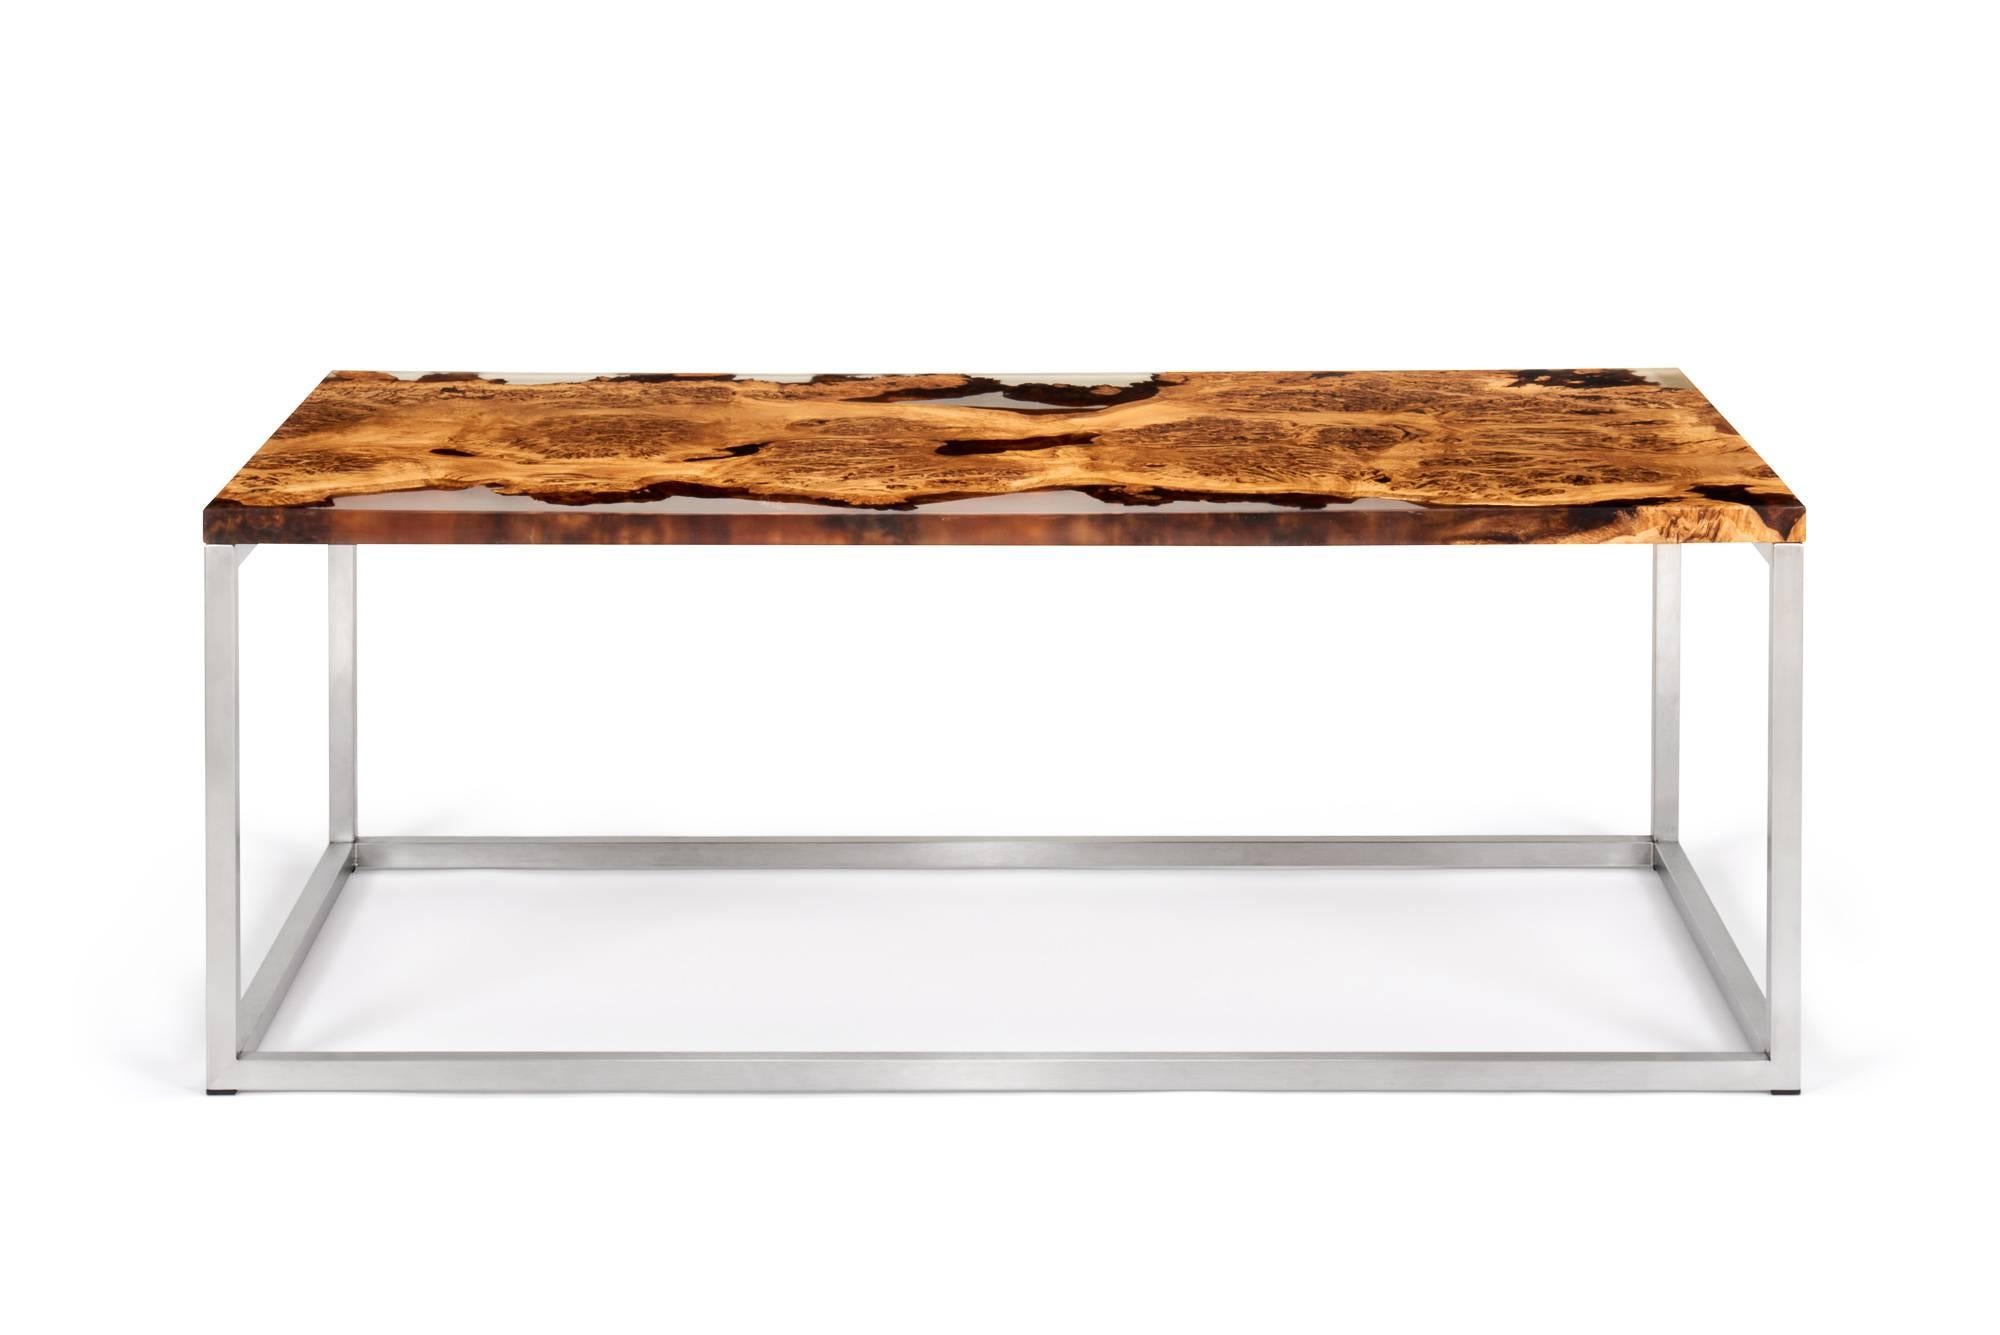 This unique coffee table is made from English oak burr. The wood has been cast in a clear resin allowing for a beautiful view of the live edges and grain pattern. The rectangular base selected for this table is brushed stainless steel.